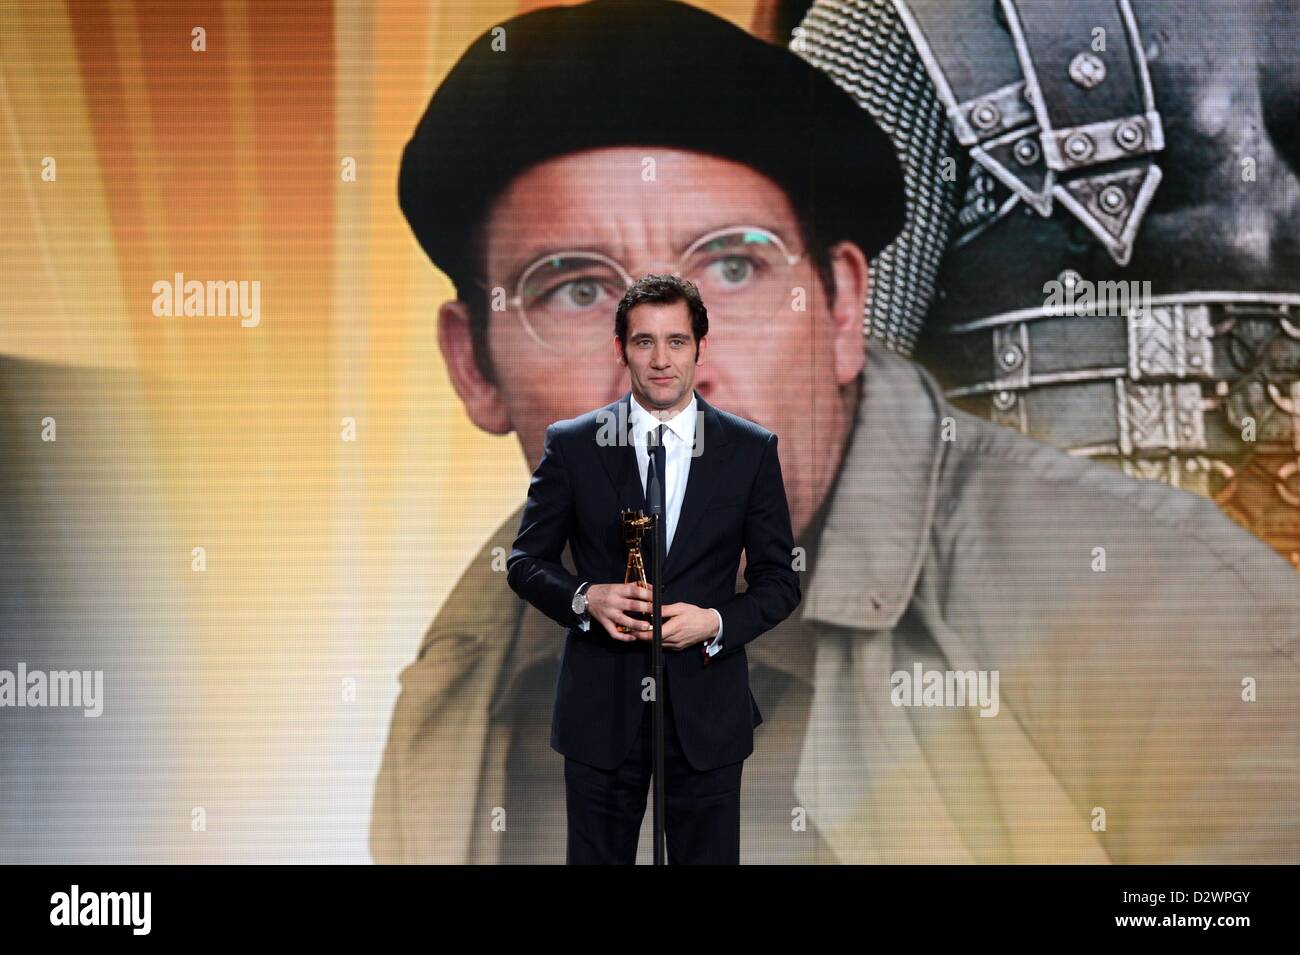 Actor Clive Owen attends the 48th Golden Camera Awards (Goldene Kamera) at the Axel Springer Haus on February 2, 2013 in Berlin, Germany Stock Photo